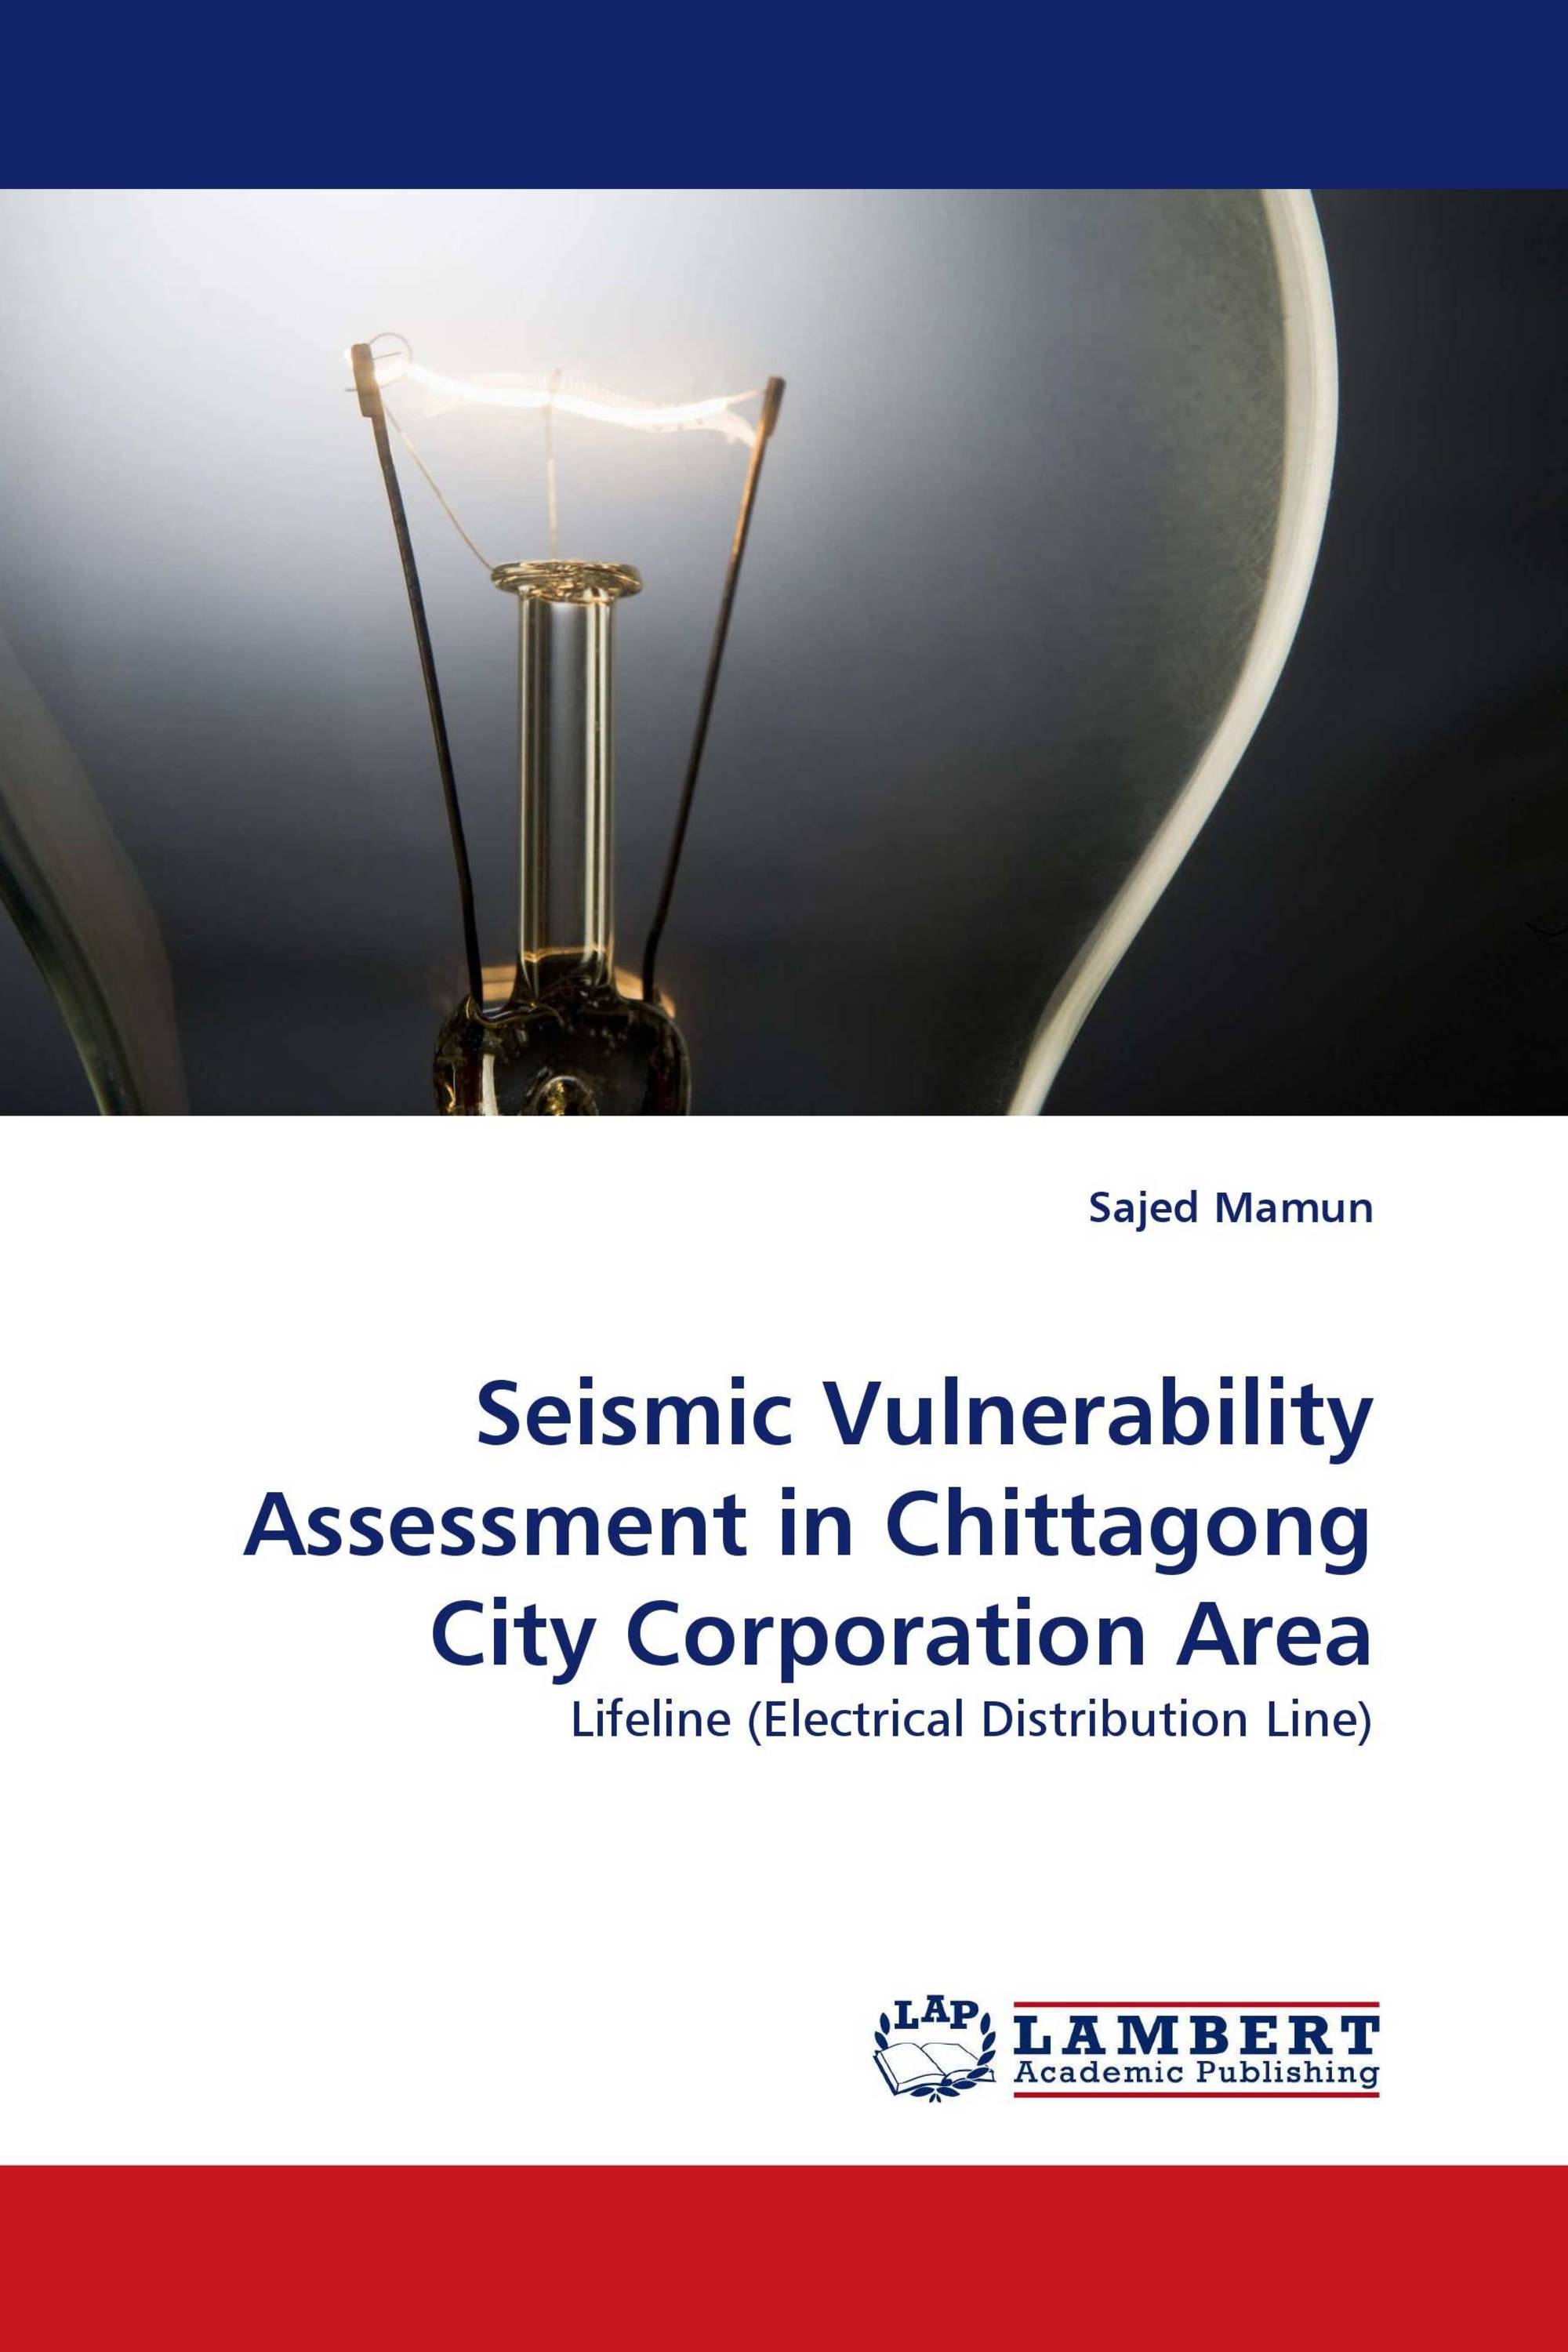 Seismic Vulnerability Assessment in Chittagong City Corporation Area